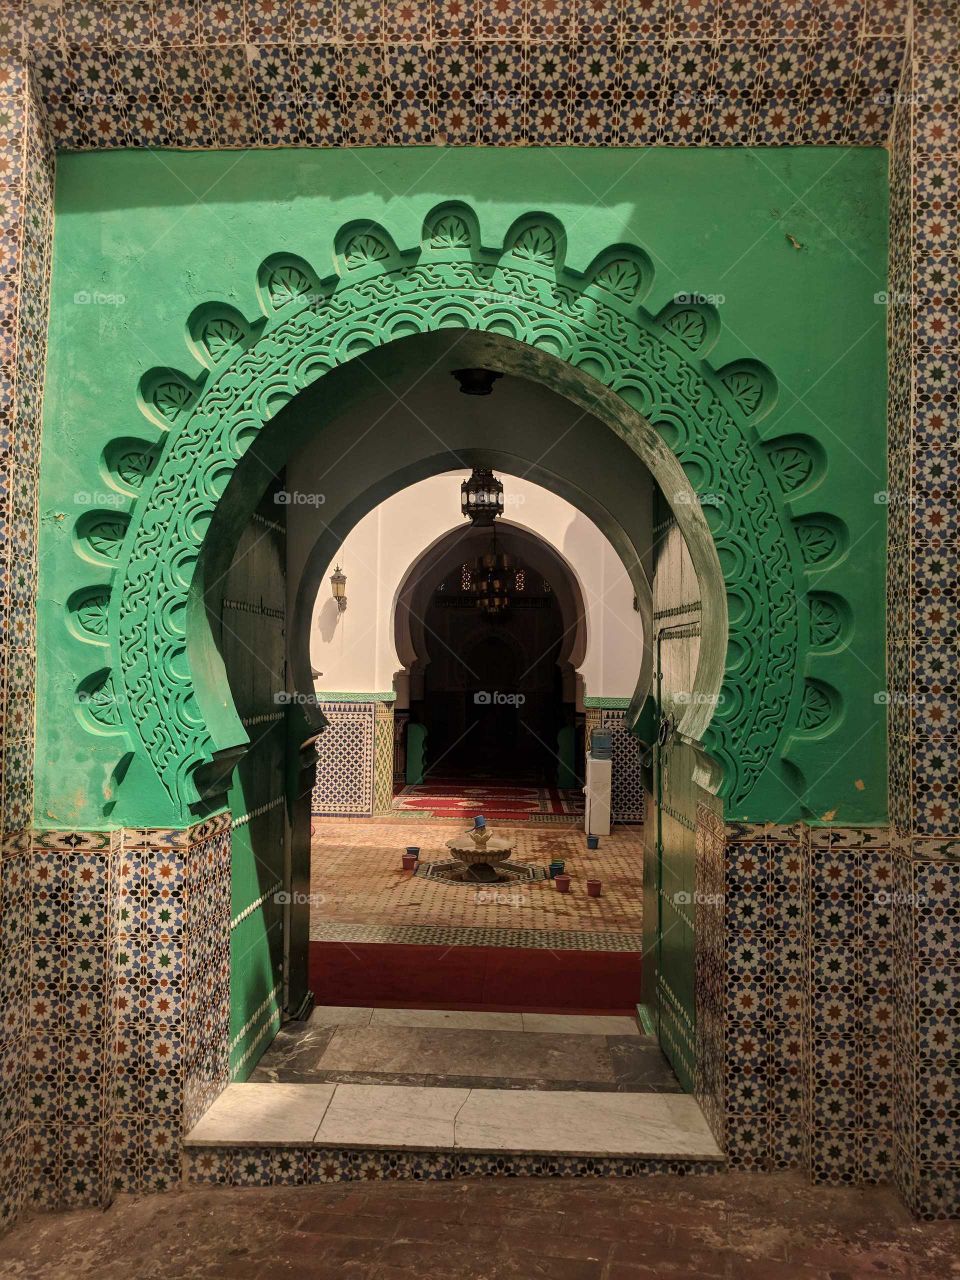 Beautiful Green Arch and Ceramic Mosaic Overlooking a Courtyard in Tangier, Morocco